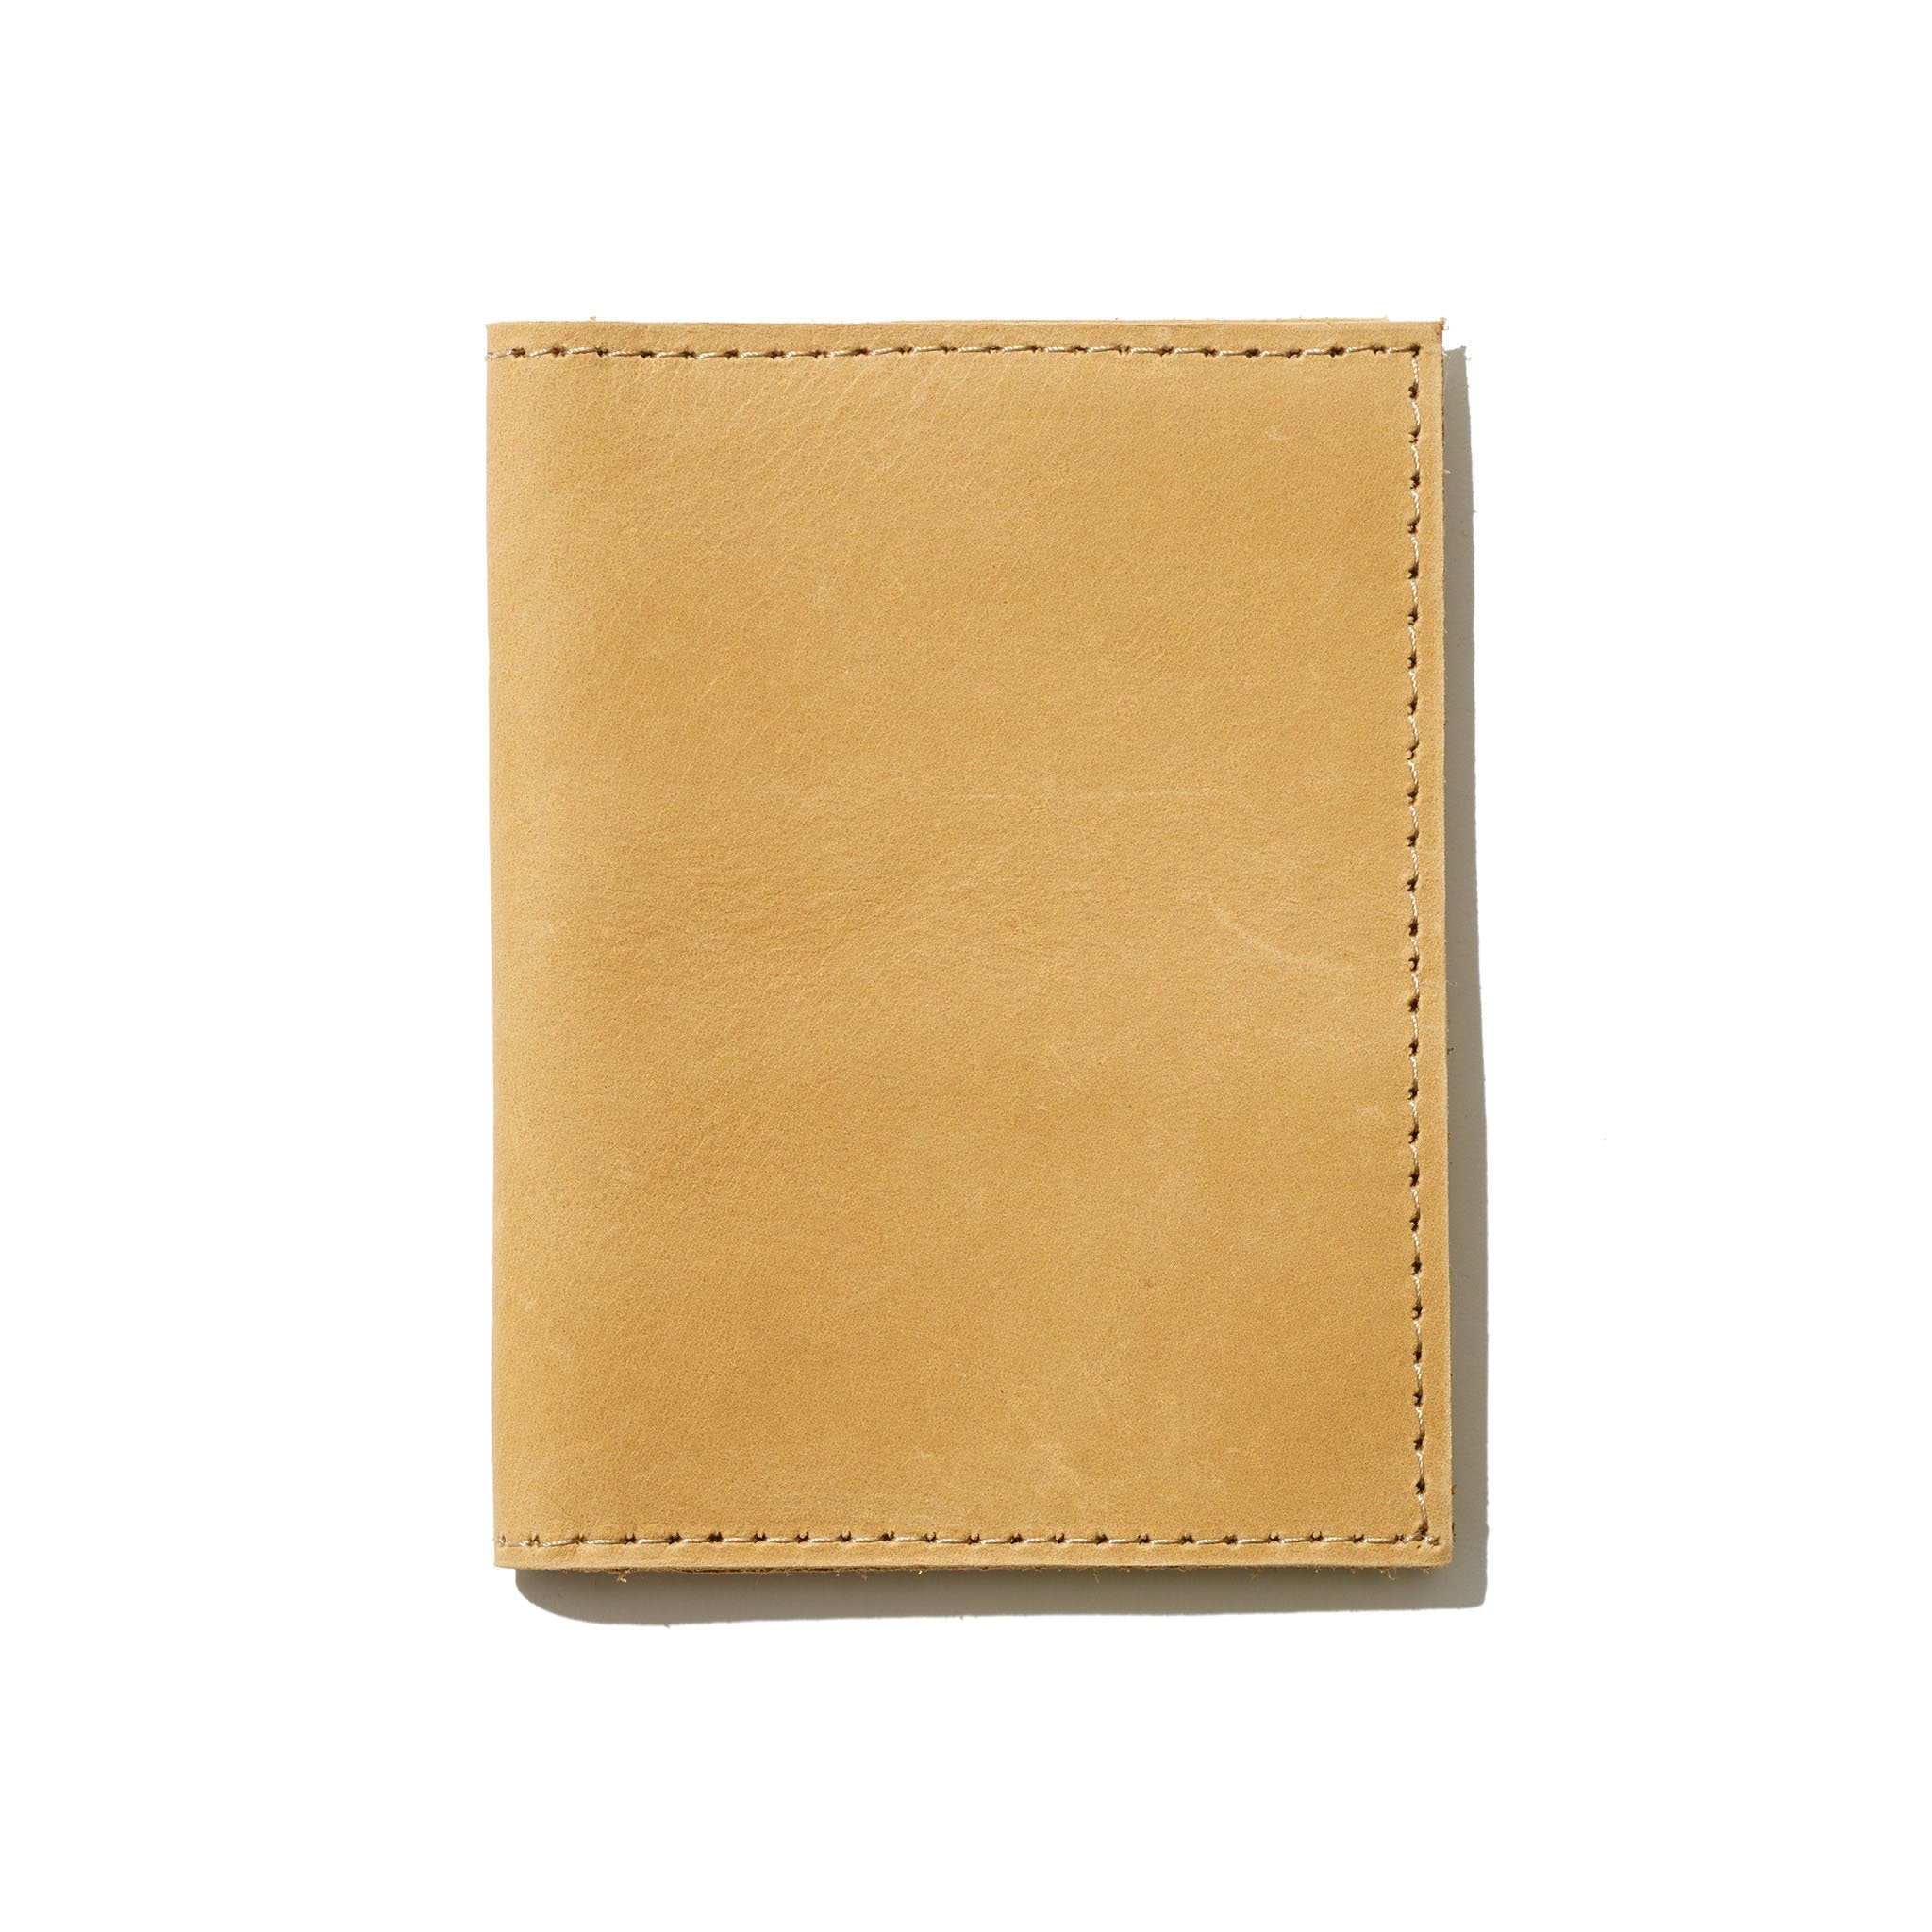 A yellow passport wallet perfect for everyday use and handcrafted from sustainable leather.